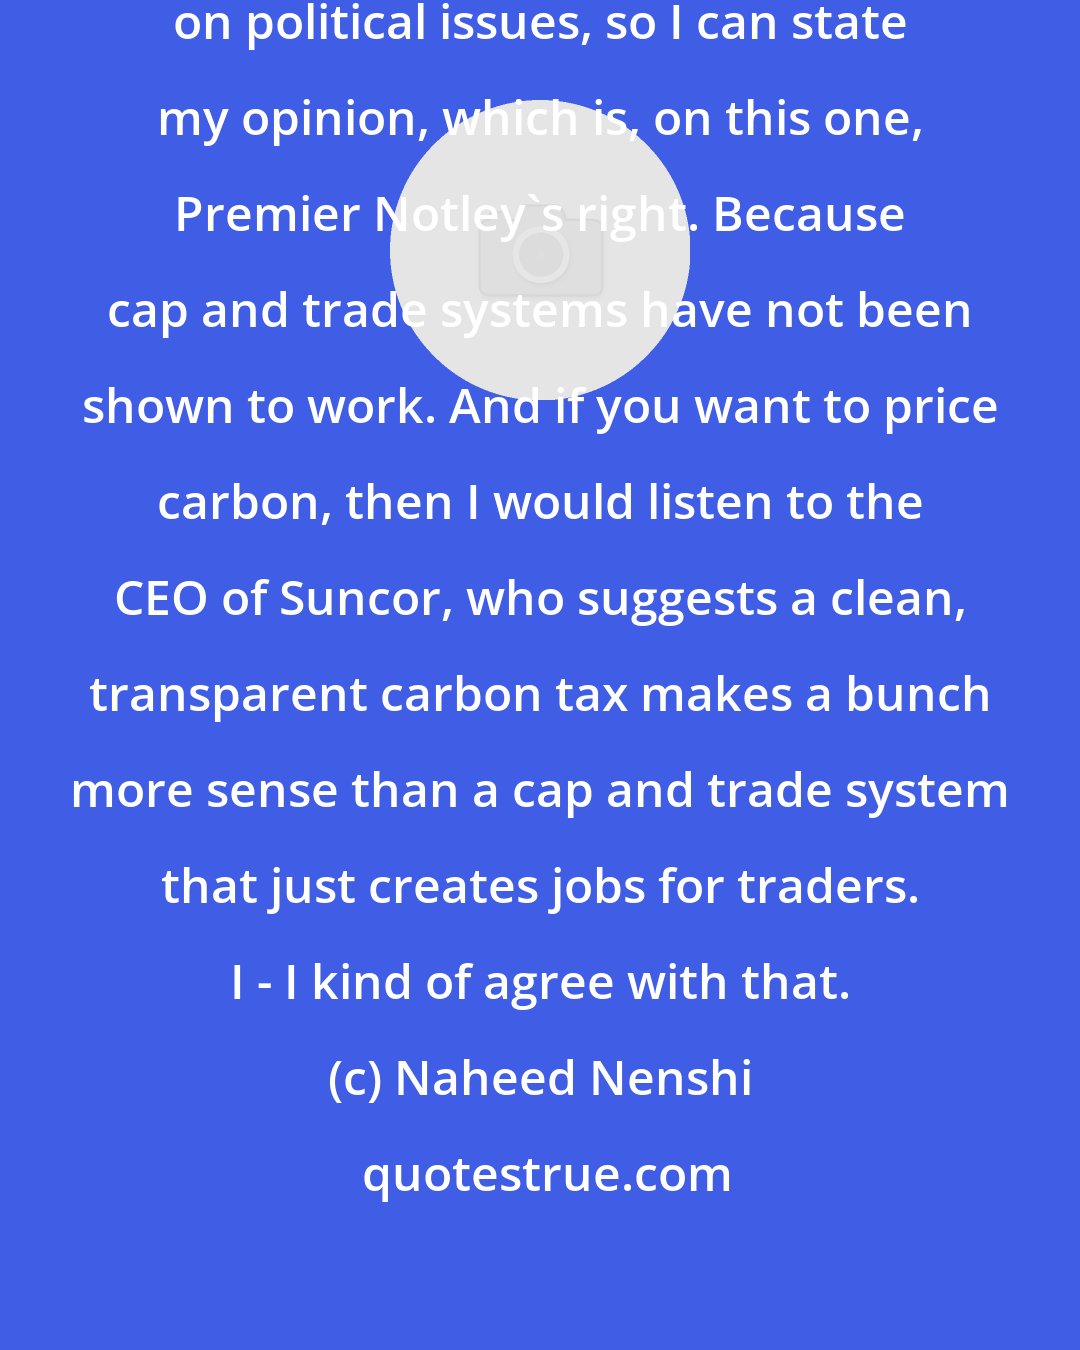 Naheed Nenshi: I'm not shy about stating my opinion on political issues, so I can state my opinion, which is, on this one, Premier Notley's right. Because cap and trade systems have not been shown to work. And if you want to price carbon, then I would listen to the CEO of Suncor, who suggests a clean, transparent carbon tax makes a bunch more sense than a cap and trade system that just creates jobs for traders. I - I kind of agree with that.